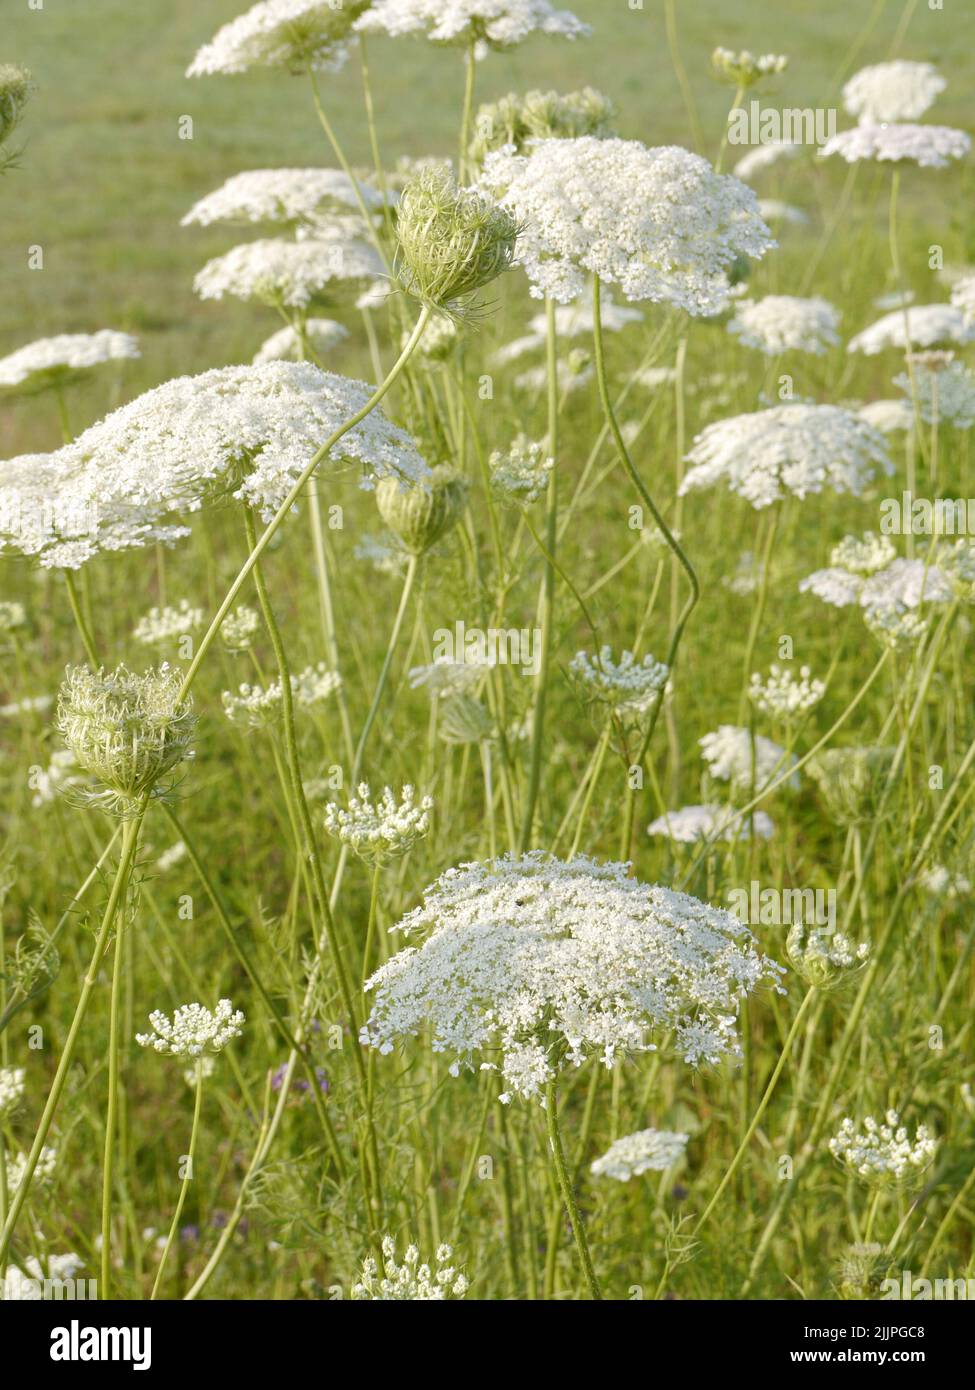 A Queen Anne's Lace growing on the Missouri prairie in the summertime Stock Photo